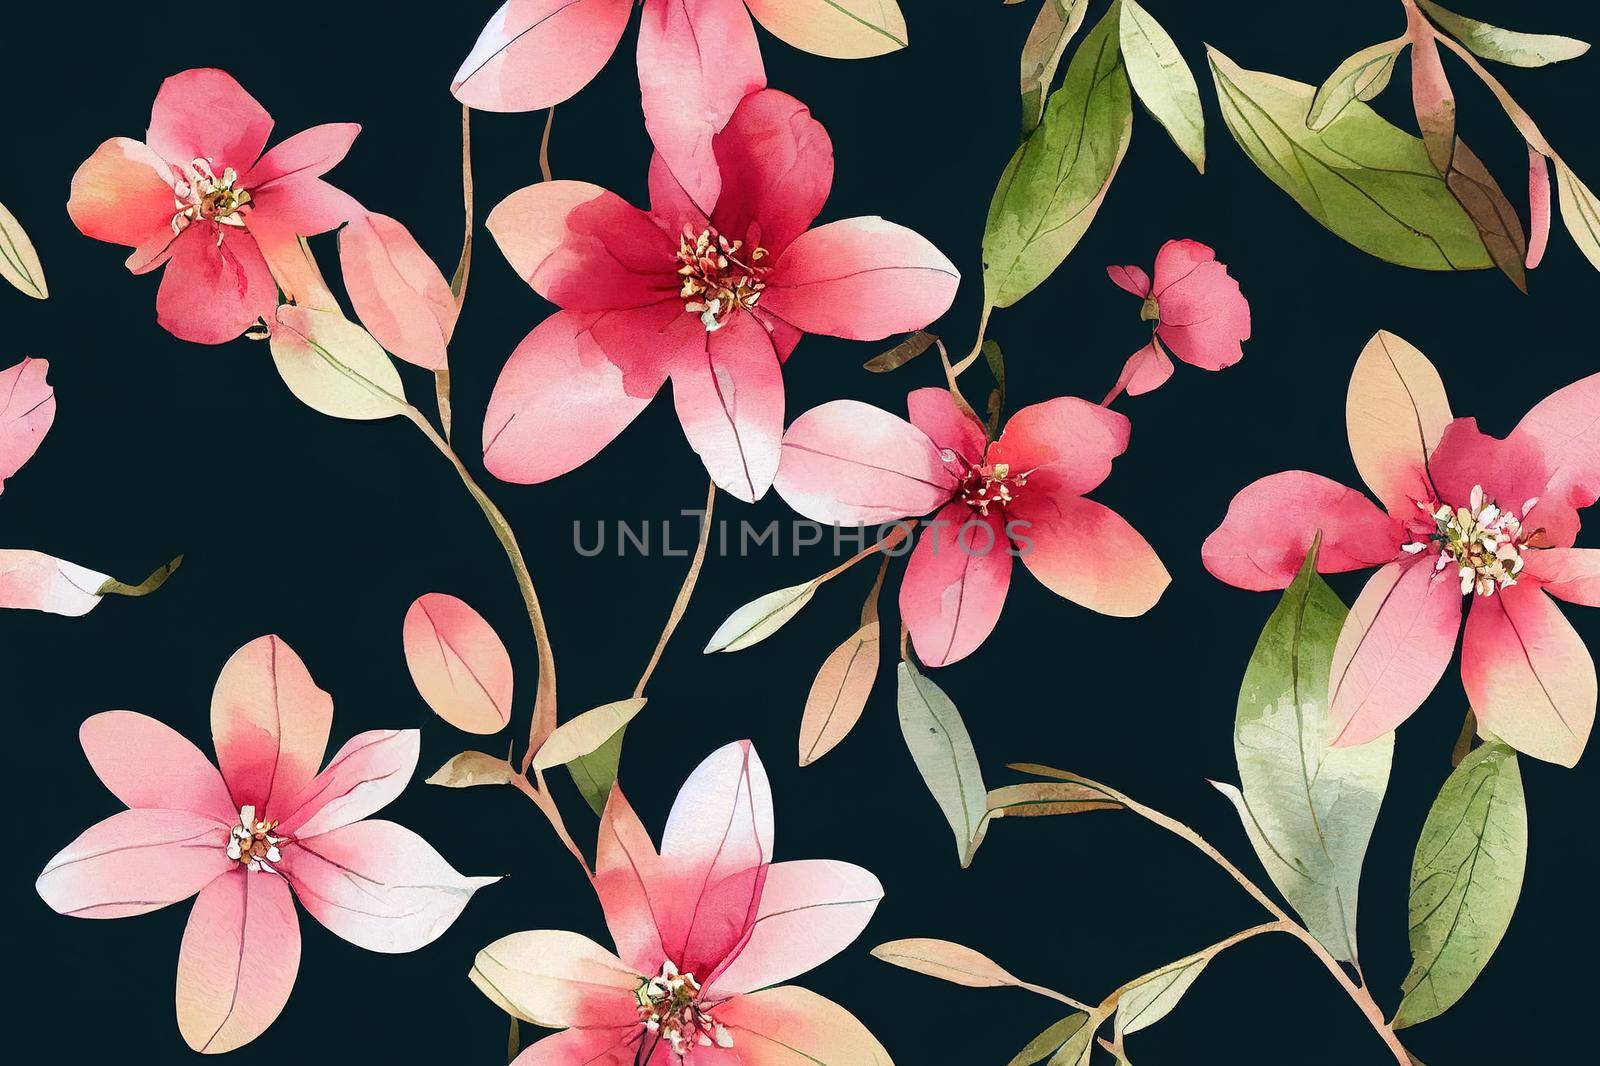 Seamless watercolor floral pattern pink blush flowers elements, green leaves branches on dark black background for wrappers, wallpapers, postcards, greeting cards, wedding invites, romantic events.